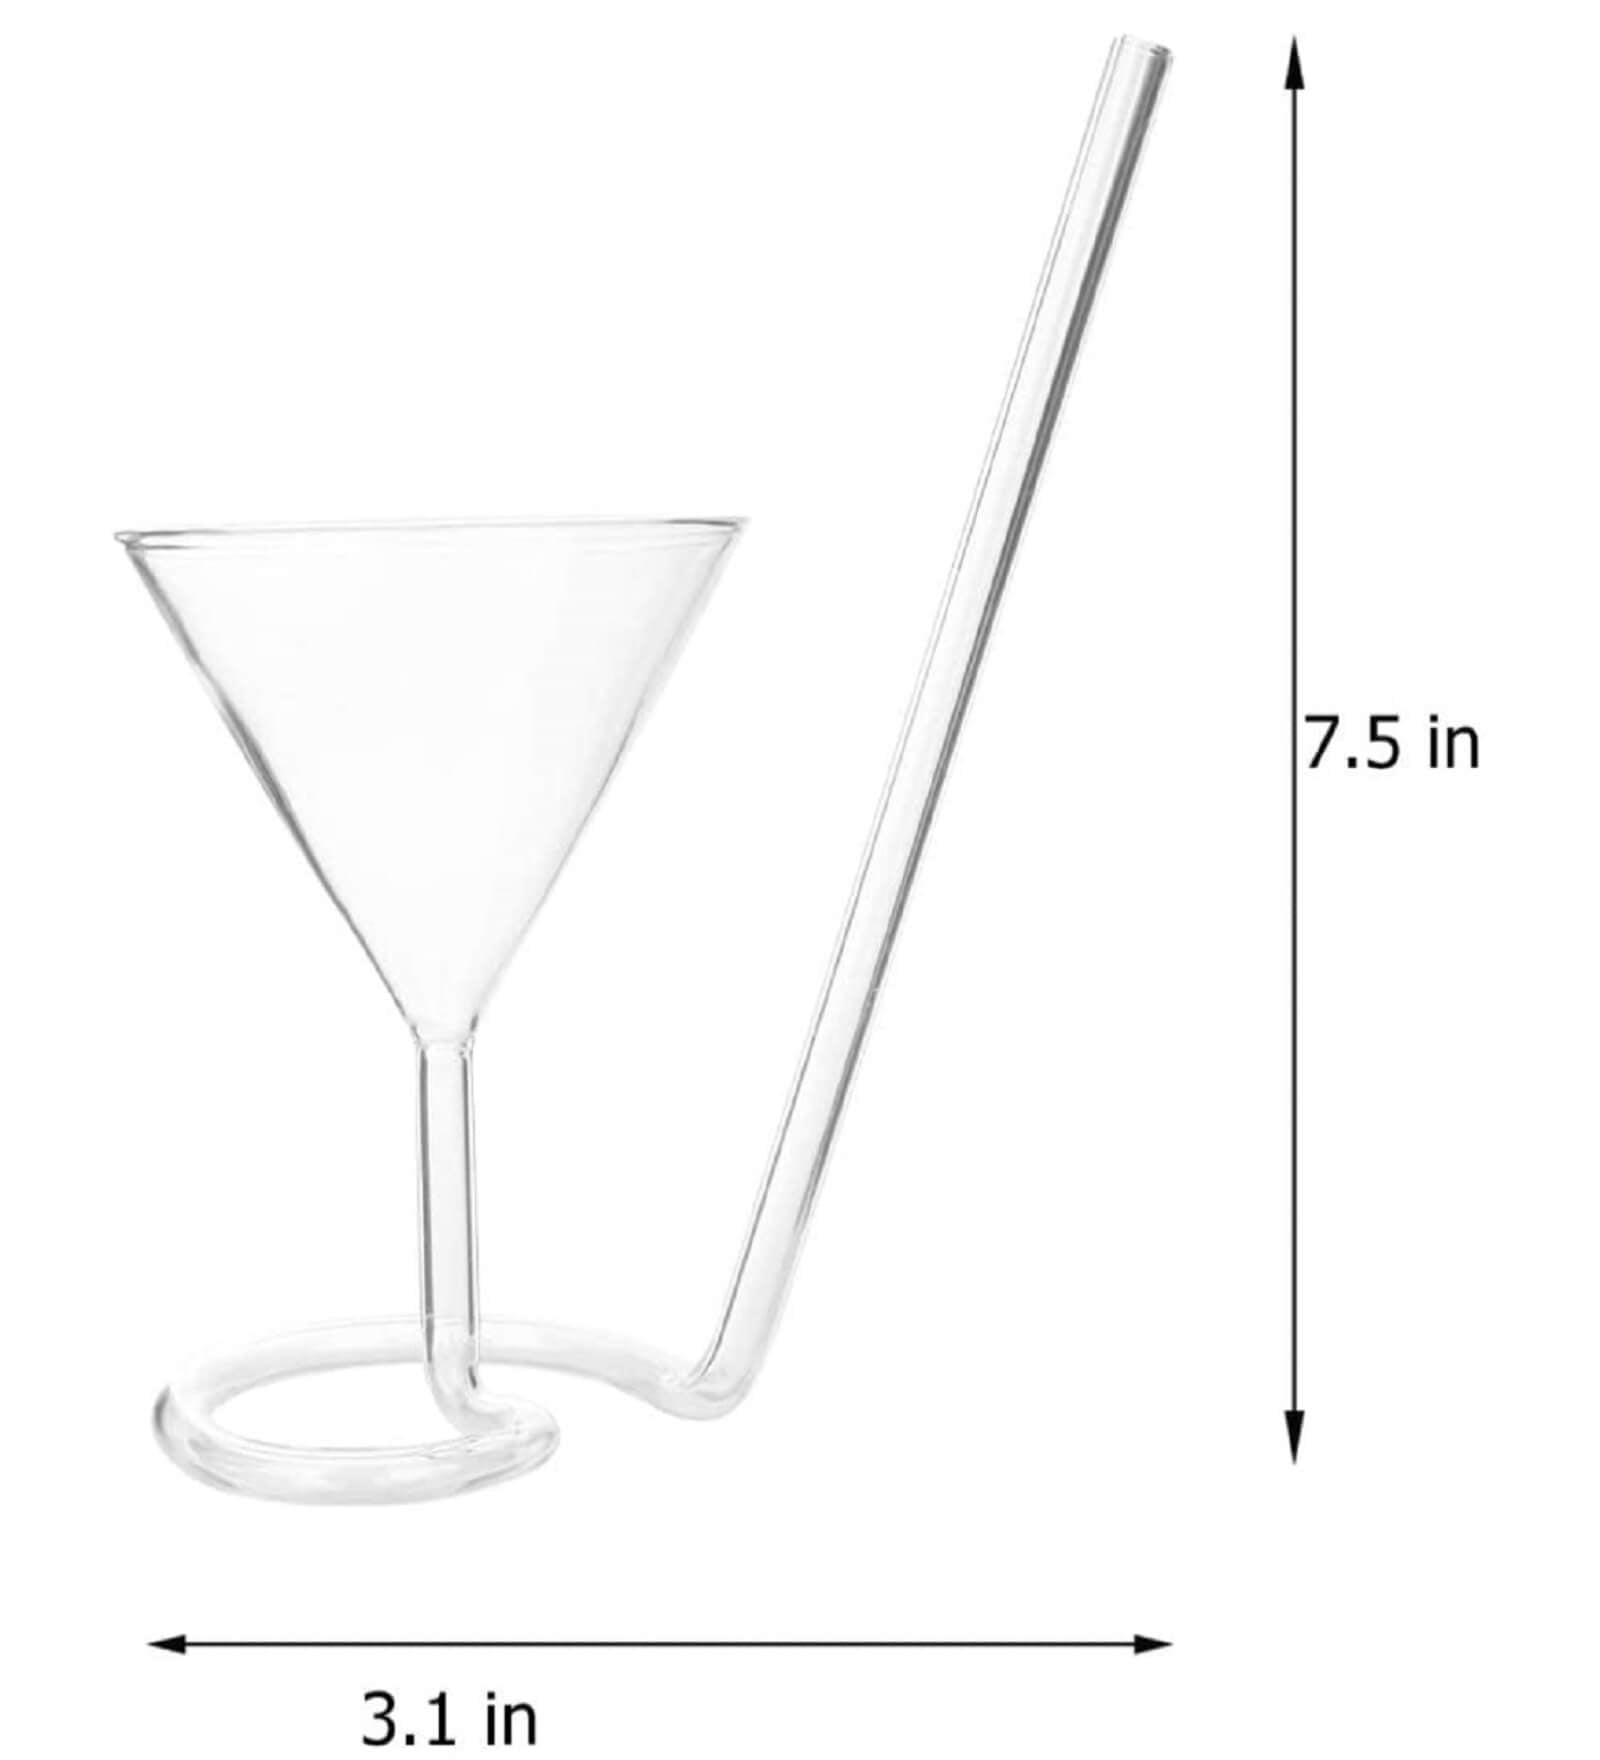 Roll Sip Martini Cocktail Glass with build in glass straw 200 ML melbify